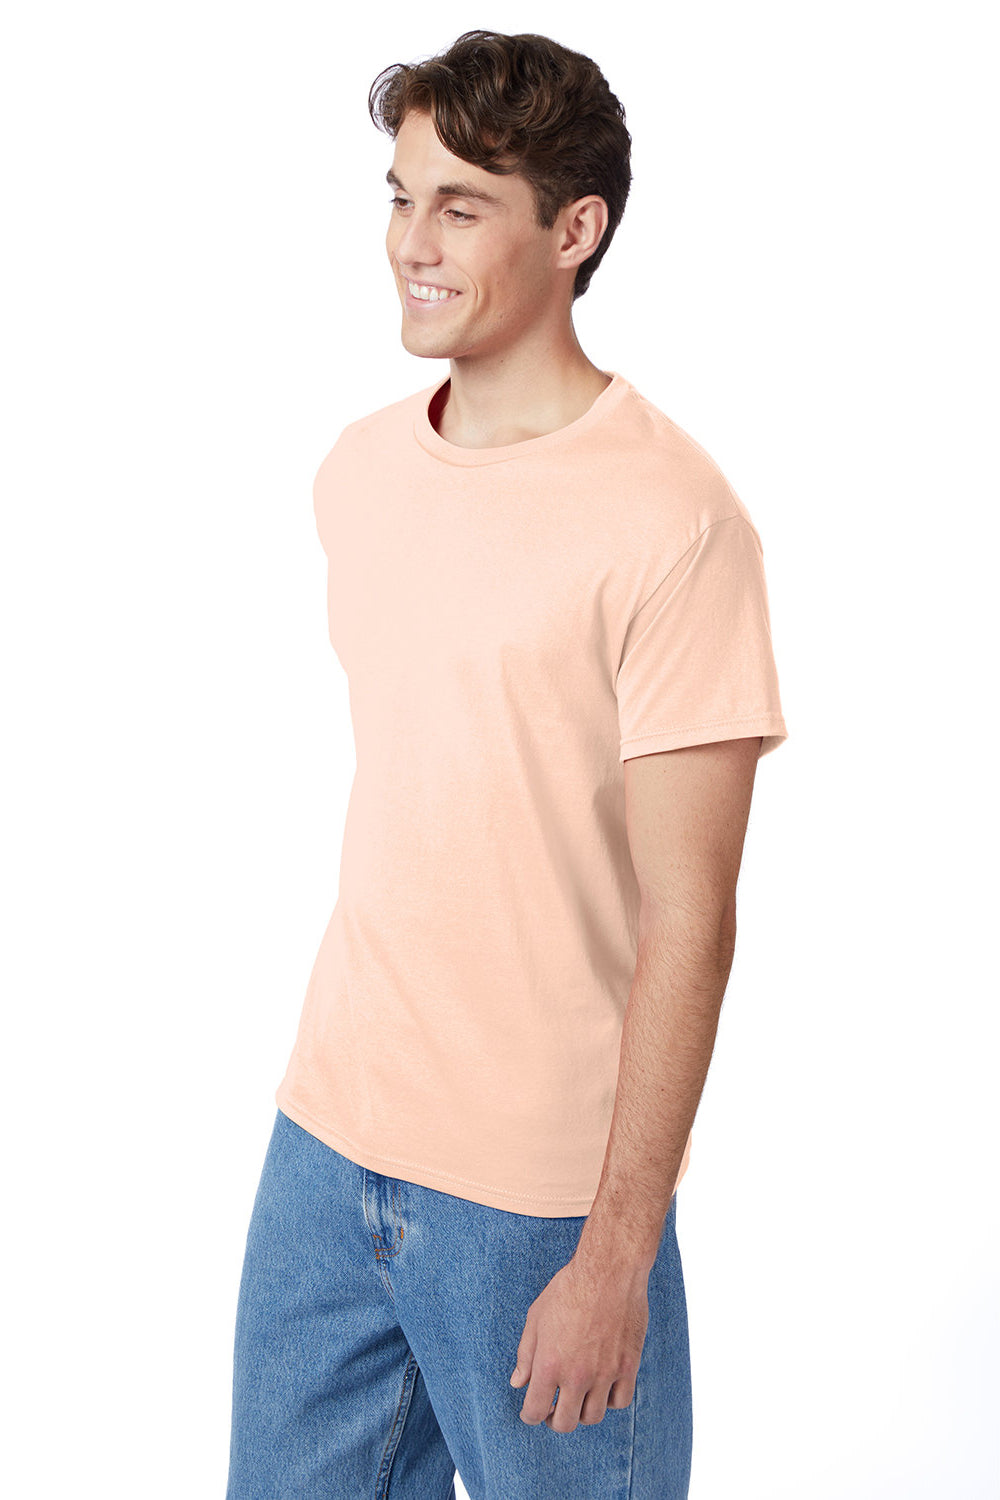 Hanes comfortsoft Pale Pink Crew Neck Shirt with Charcoal Heather